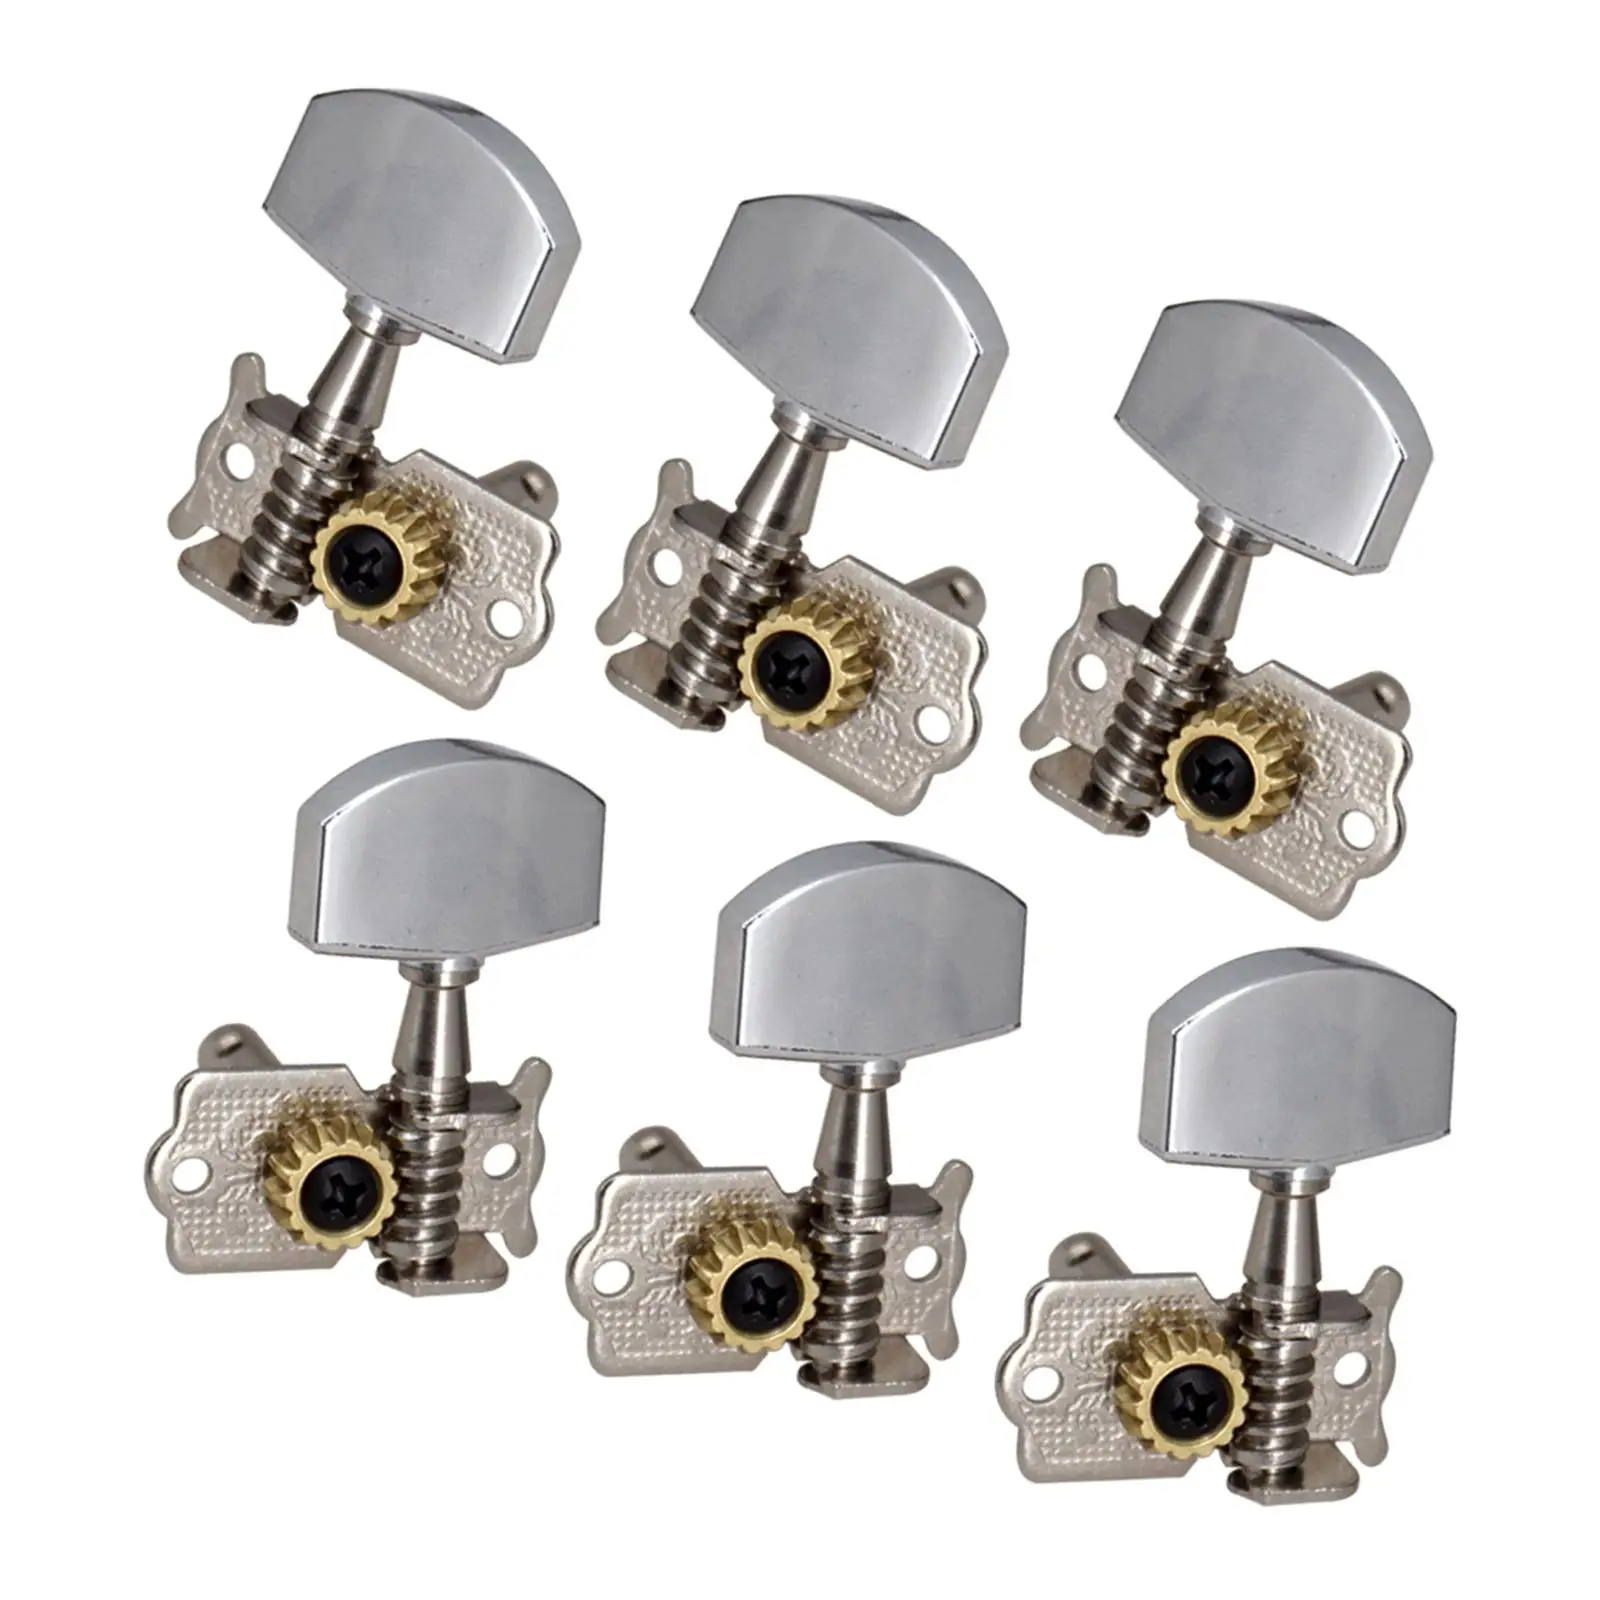 6Pcs Guitar Tuning Peg Tuner Key Peg Knobs Tuners Machine Head for Acoustic Guitar Parts Replacement